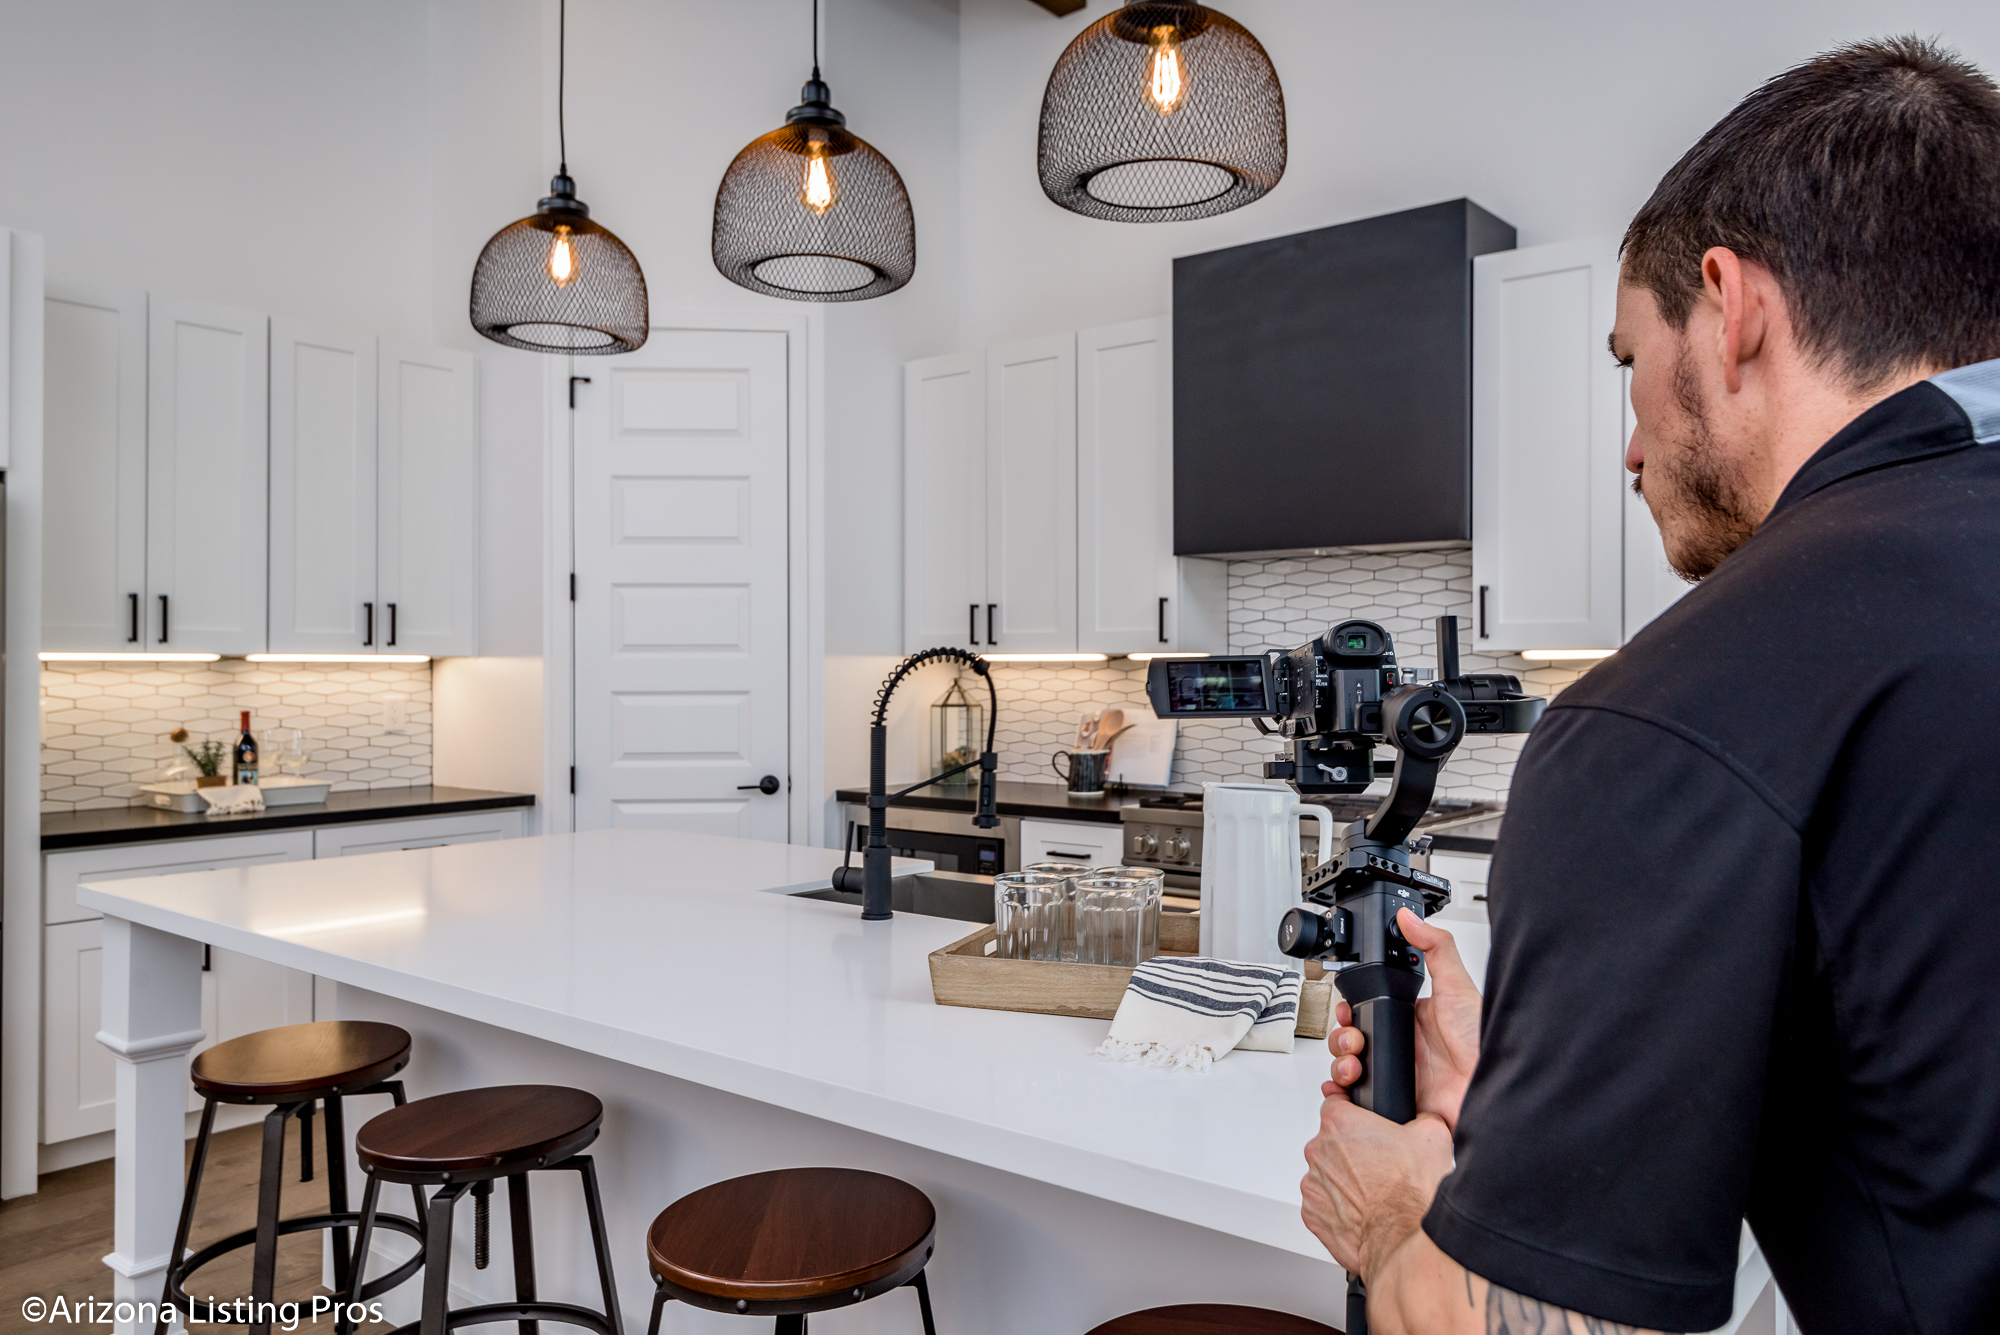 The Best Guide To Become A Real Estate Videographer